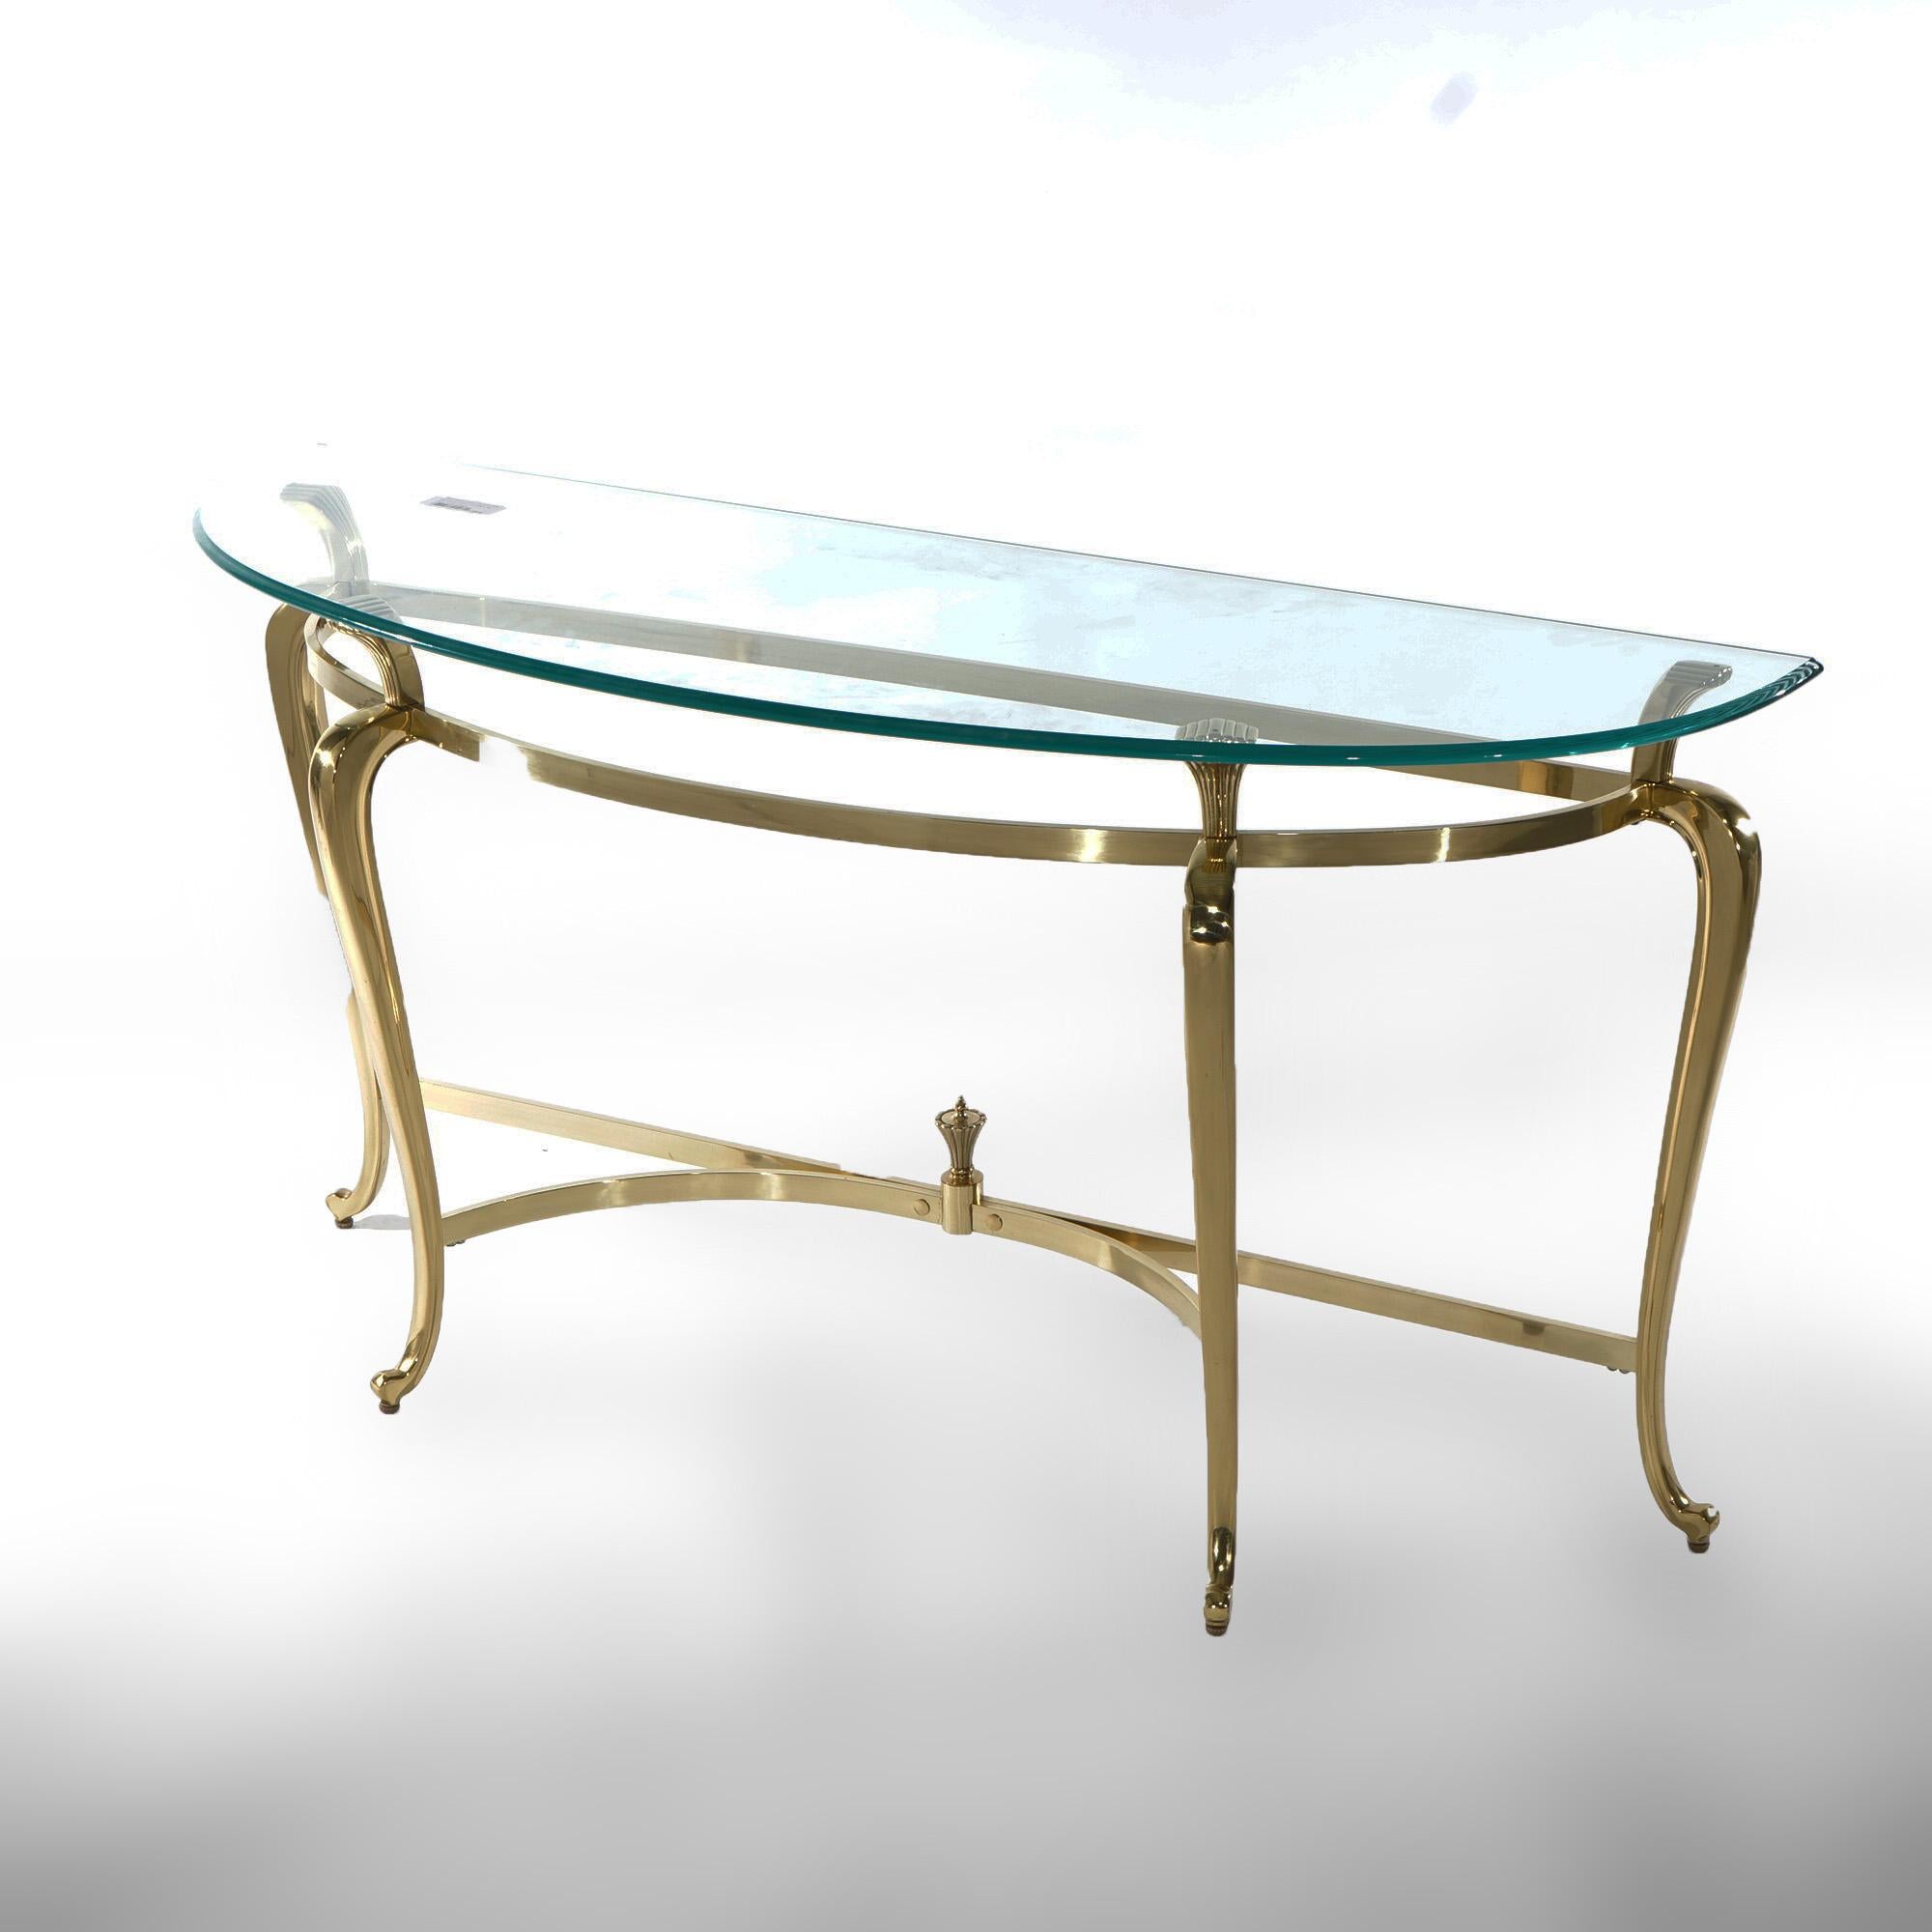 A French Louis XIV style console table offers demi-lune glass top over bronzed gilt metal base having cabriole legs terminating in stylized scroll form feet, 20th century

Measures - 27